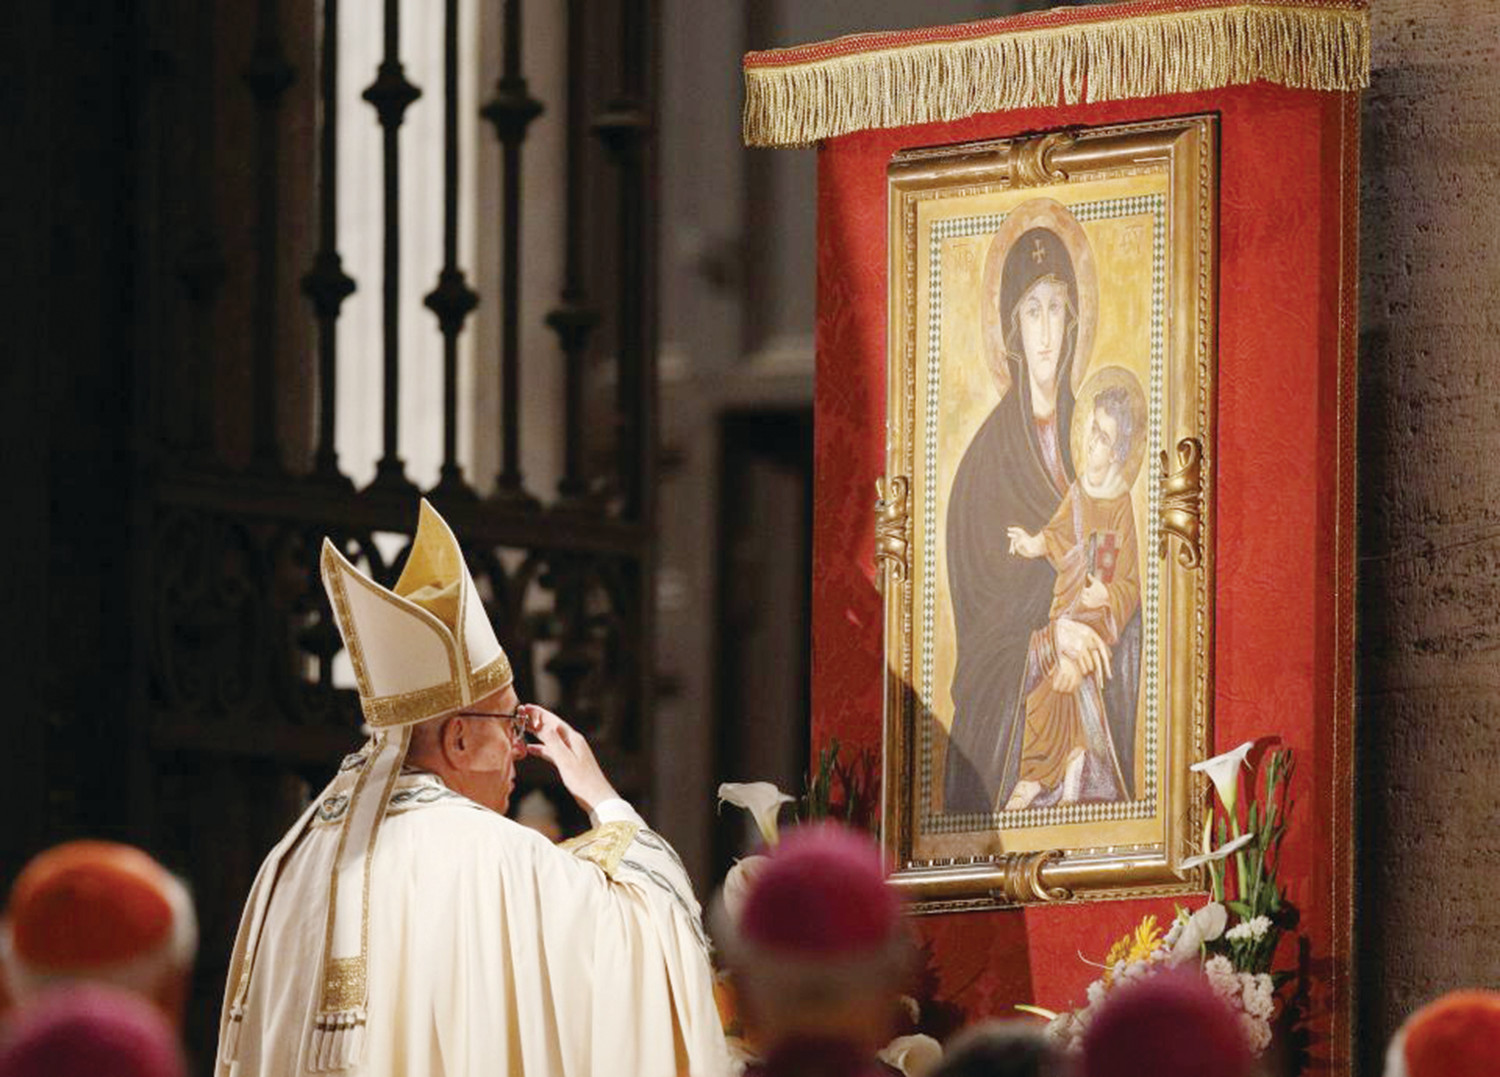 Pope Francis venerates a Marian image outside the Basilica of St. Mary Major in Rome in this May 26, 2016, file photo.